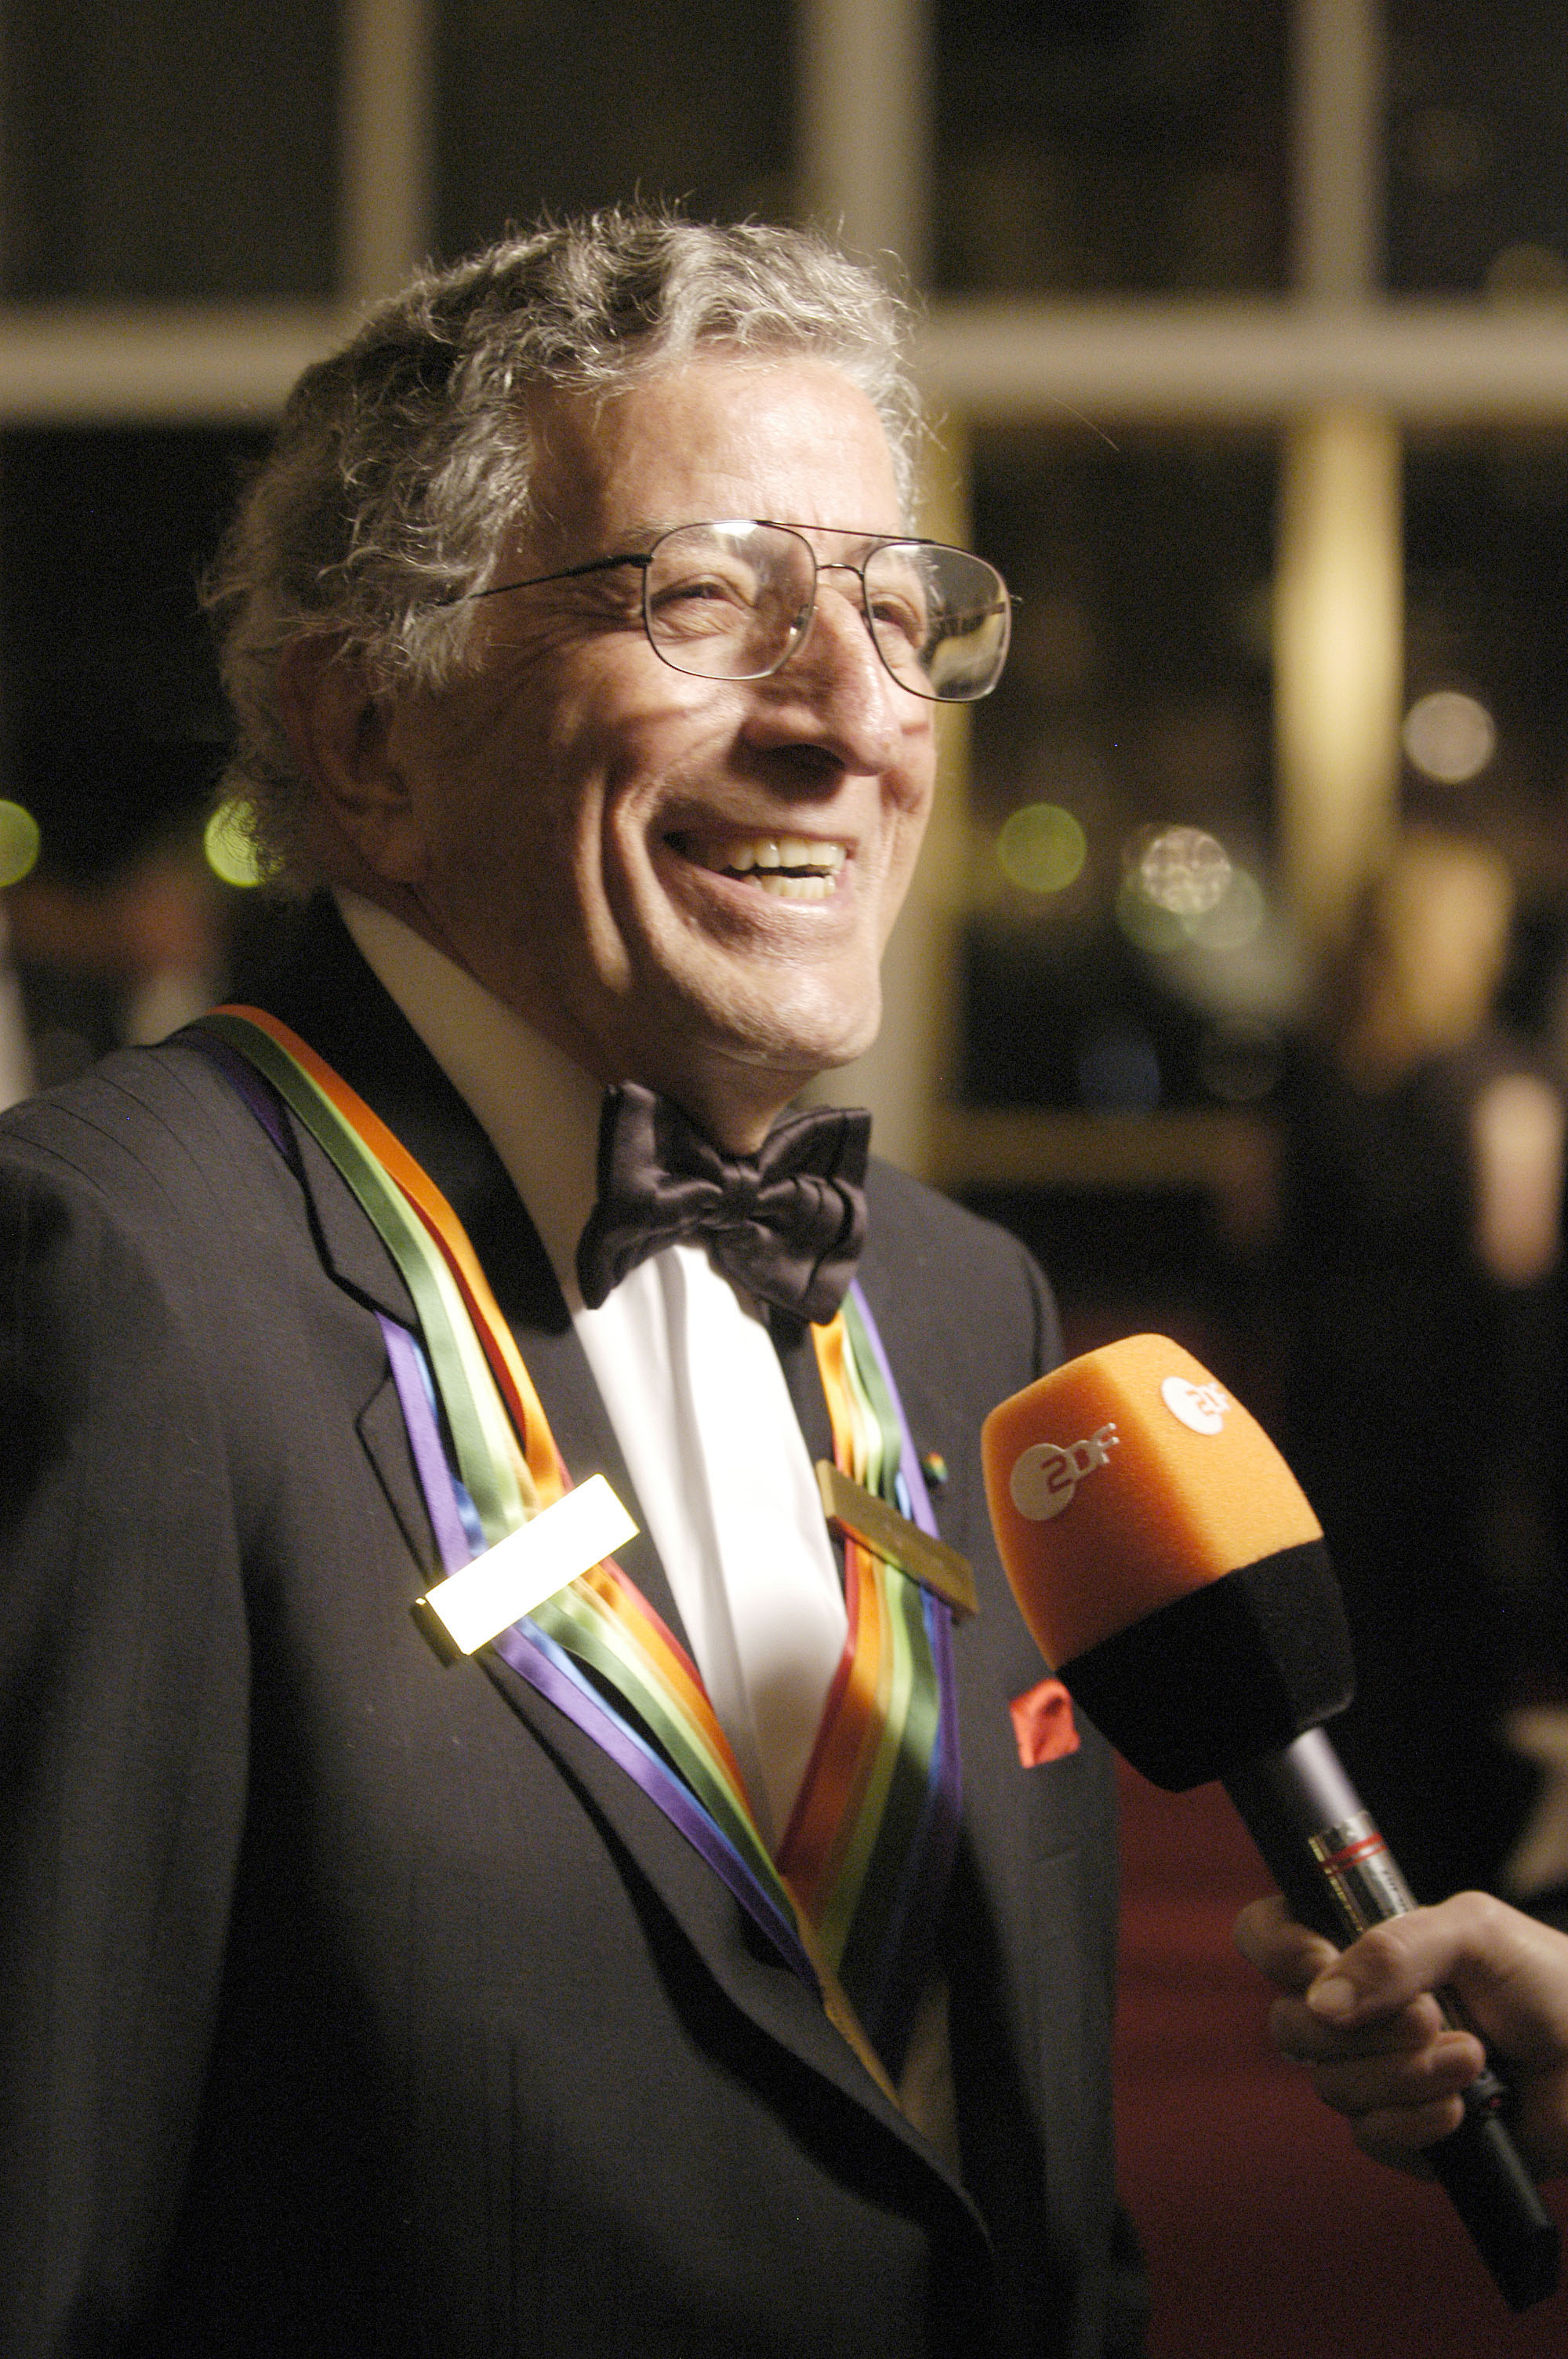 Tony Bennett, honoree during the 2005 Kennedy Center Honors, at the Kennedy Center Opera House on December 4, 2005, in Washington D.C. | Source: Getty Images